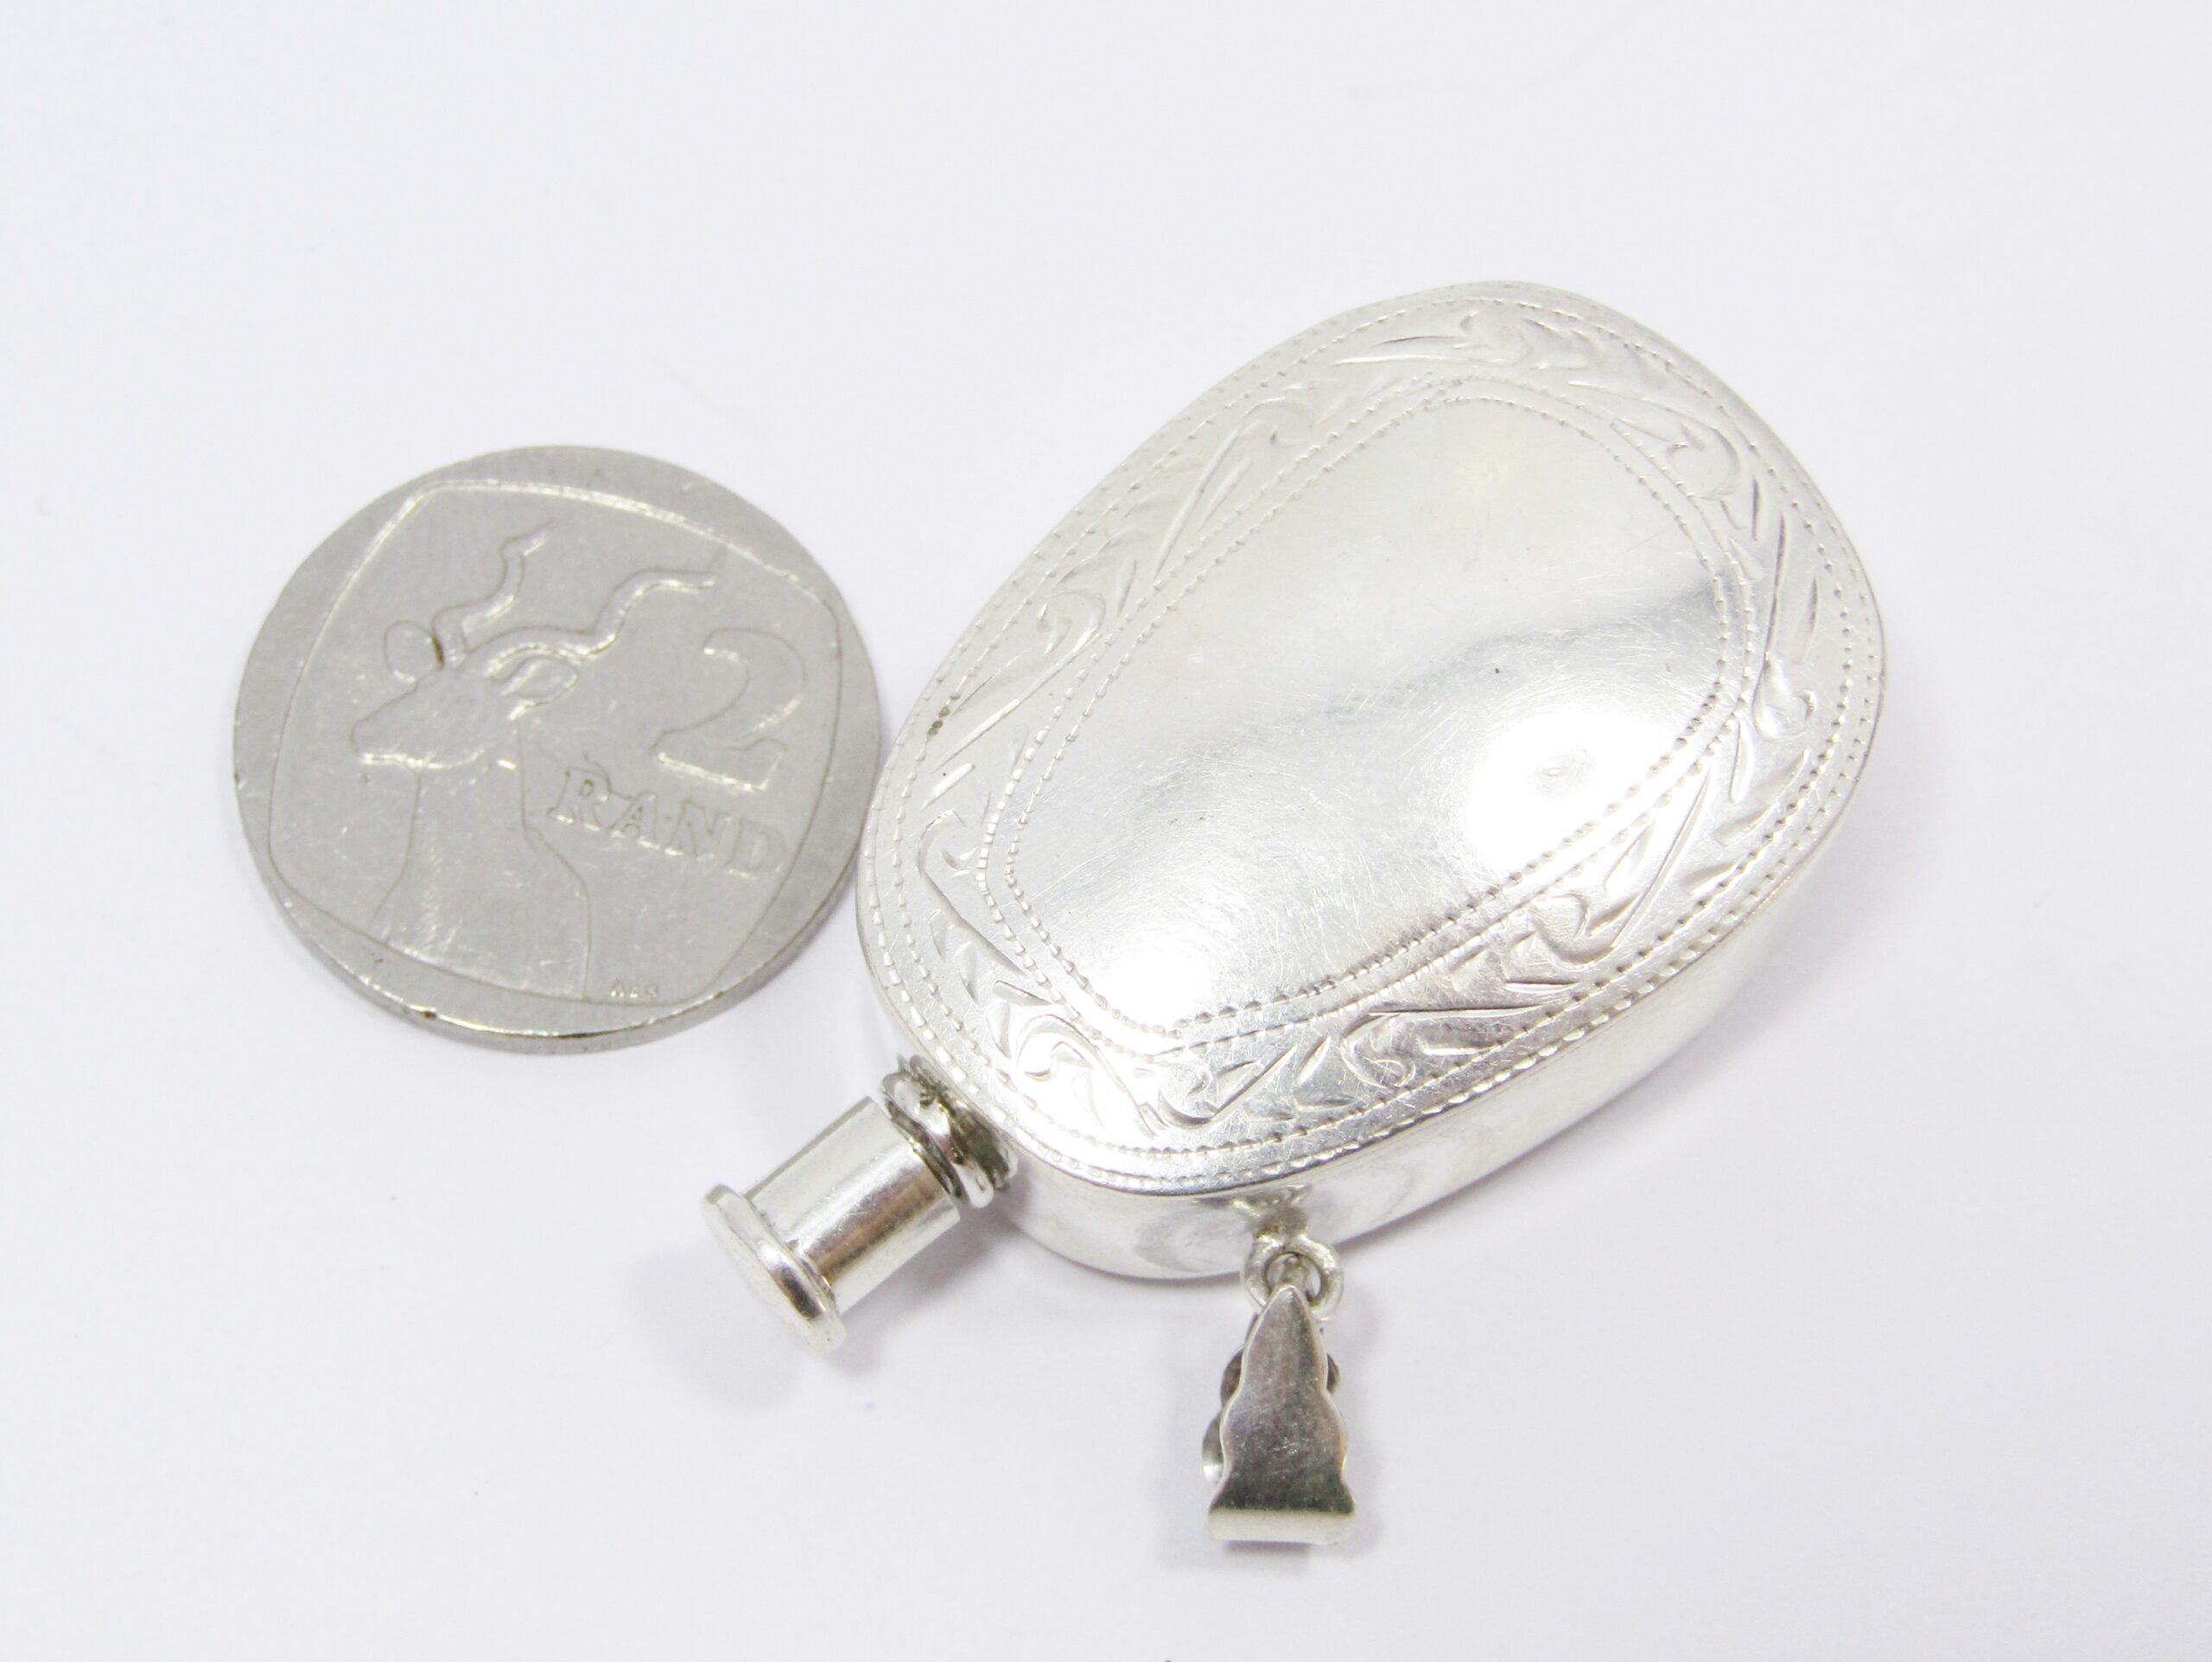 A Gorgeous Large Engraved Perfume Bottle Pendant in Sterling Silver